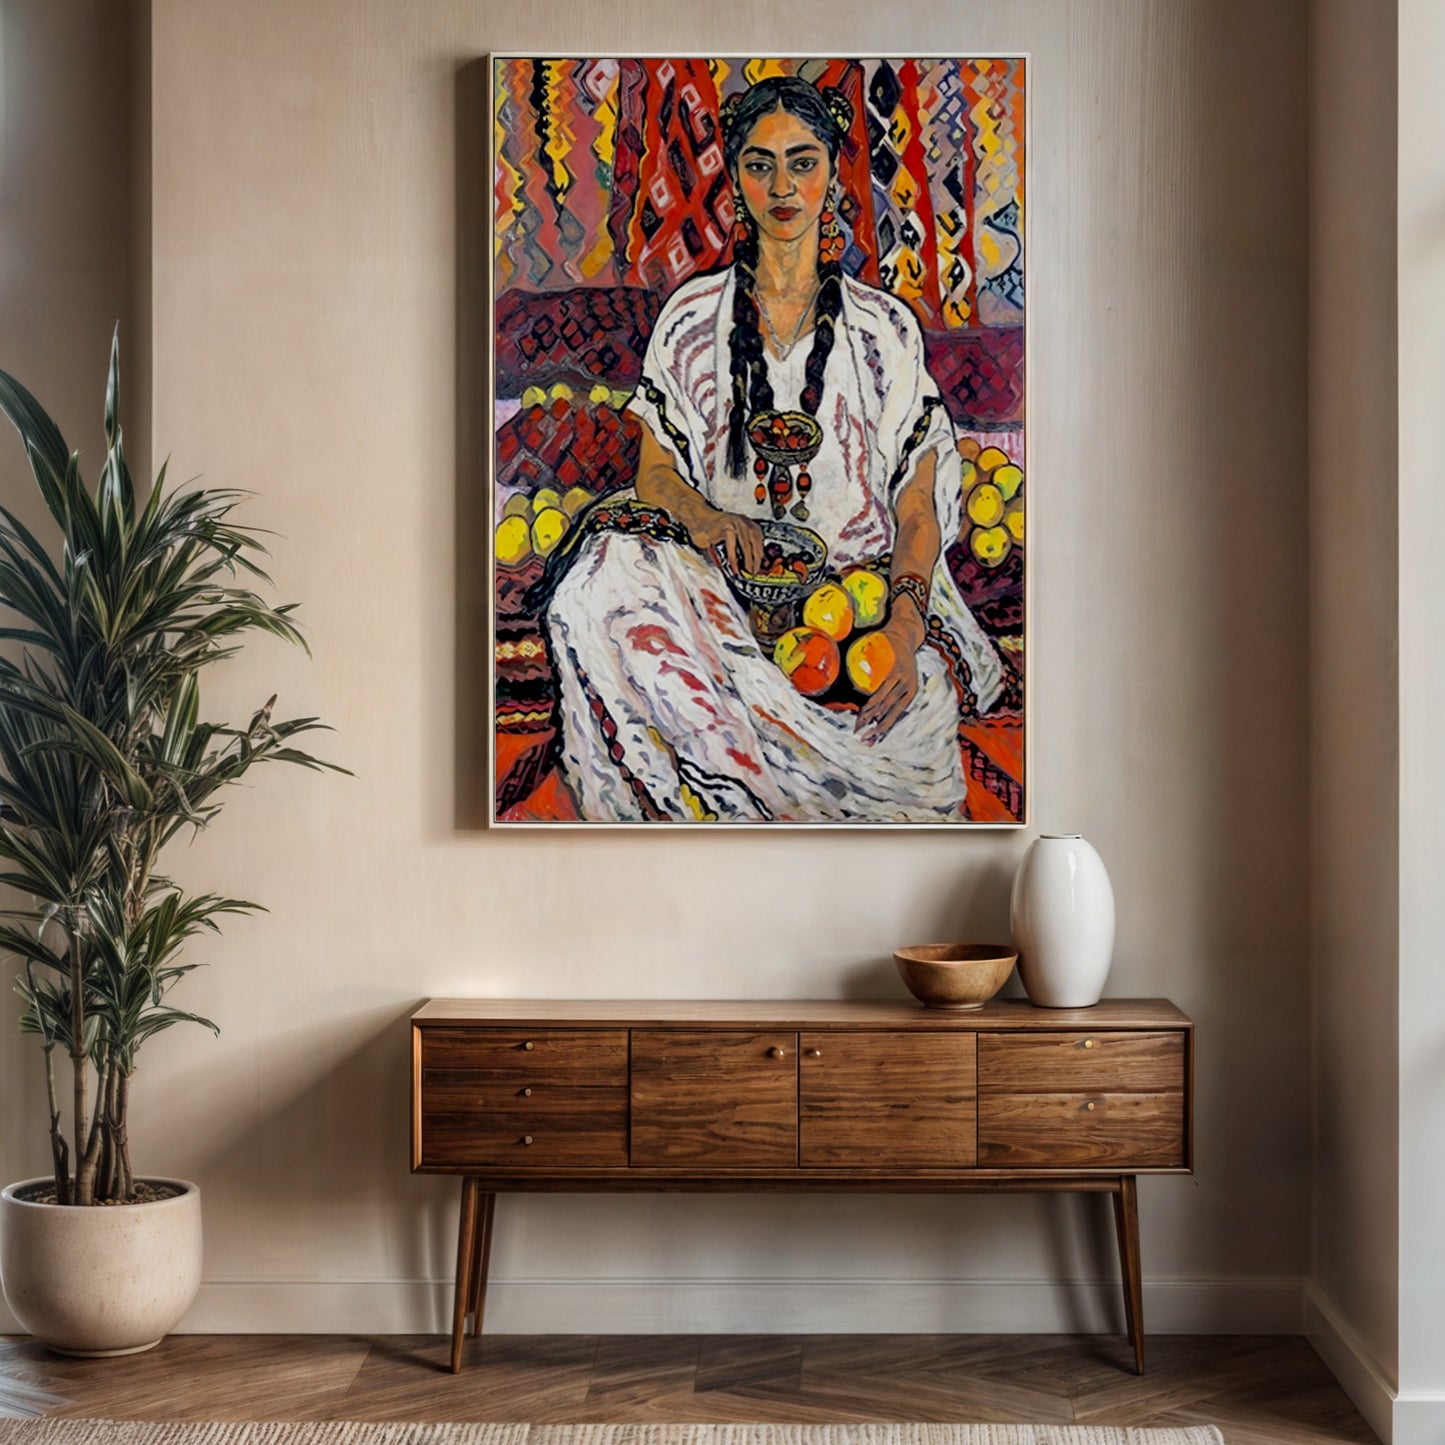 Canvas Print: "Lady Her"